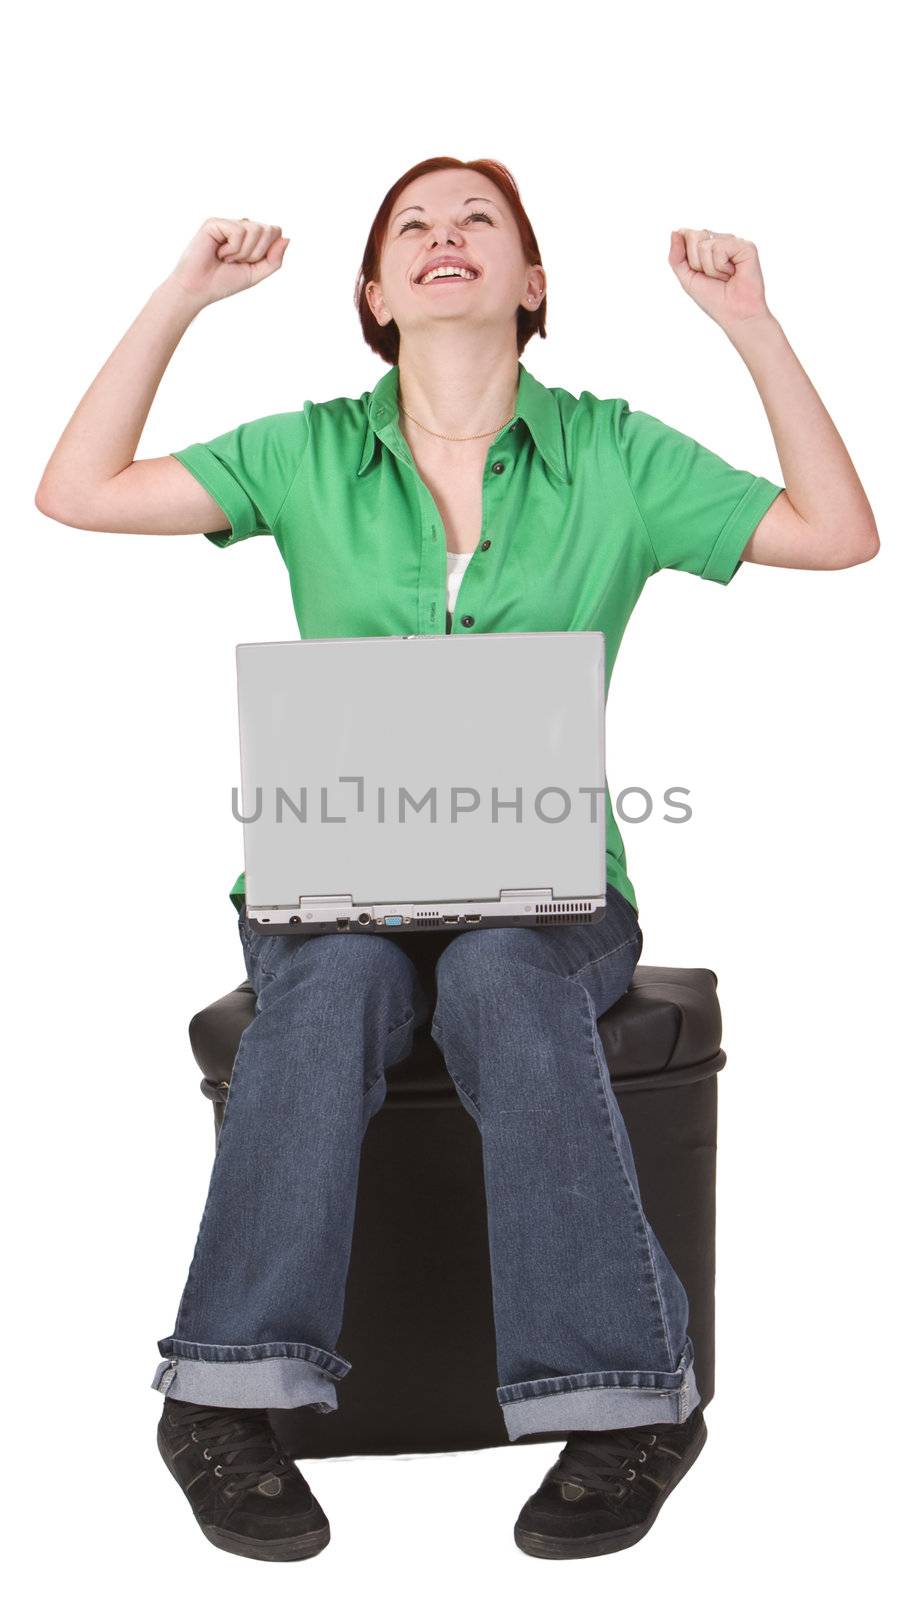 Image of redheaded teenager with a laptop expressing the feeling of victory.